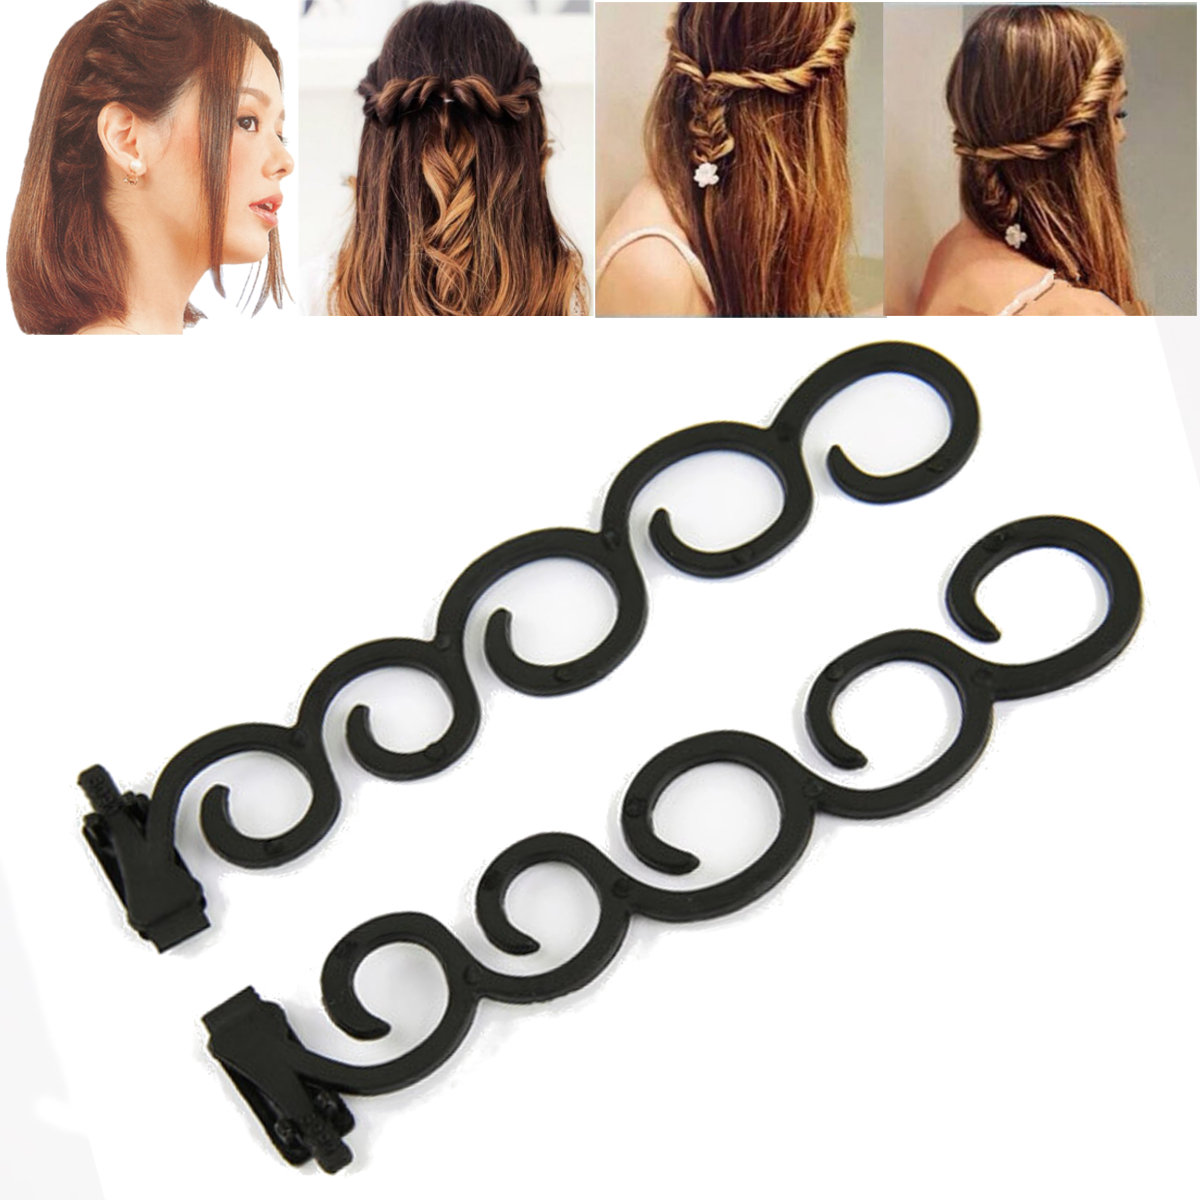 

2Pcs Waterfall Braid Twist Roller French Back Hair Styling Clip Tool